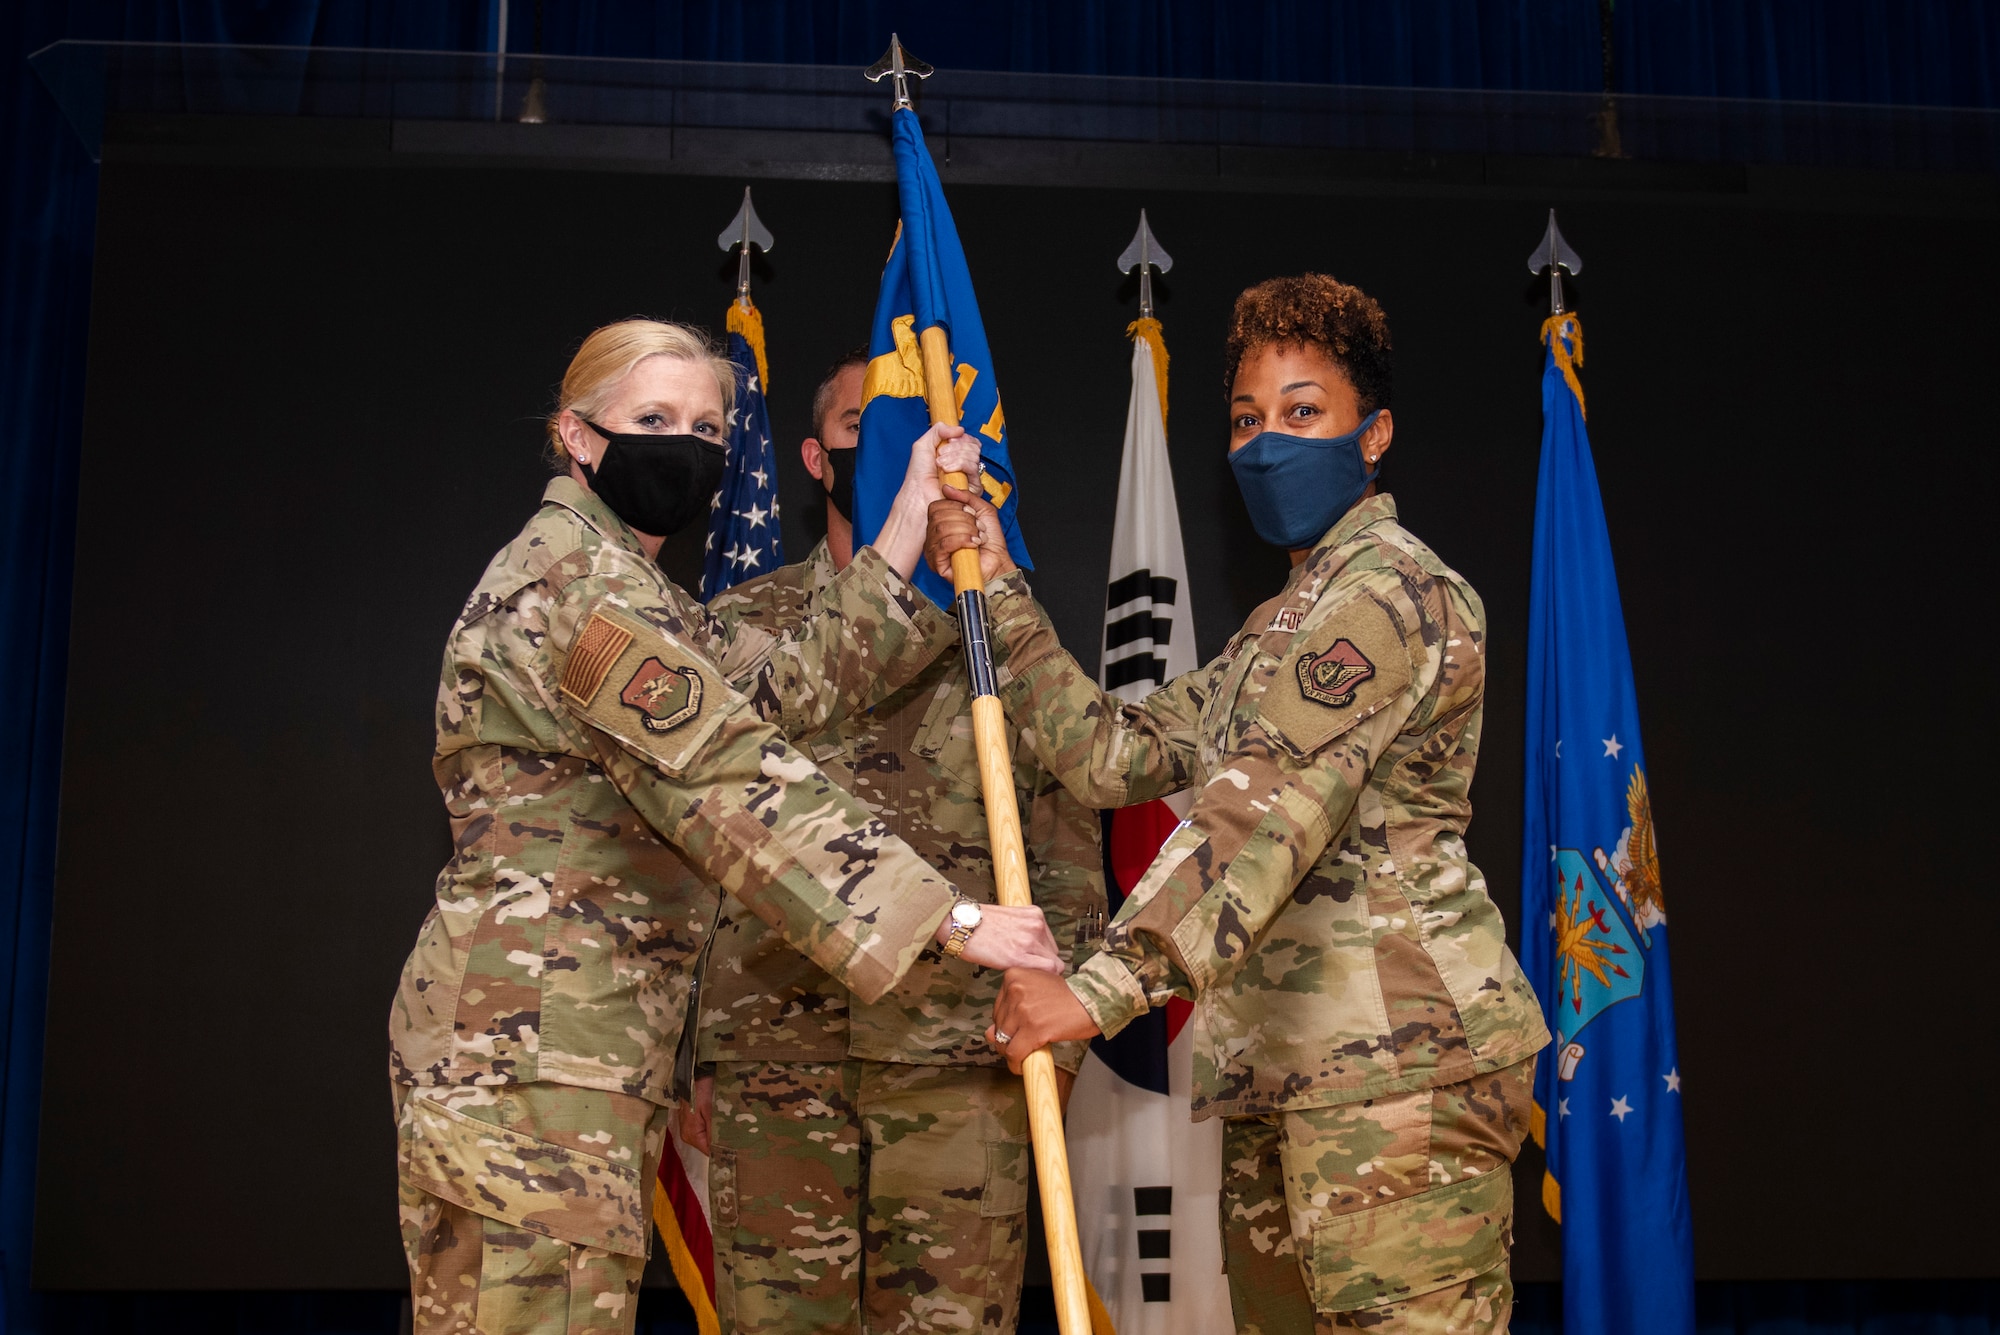 The 51st Force Support Squadron held a change of command ceremony at Osan Air Base, Republic of Korea, July 21, 2021. Lt. Col. Sheri Kraus transferred command of the 51st FSS to Lt. Col. Tamekia Payne